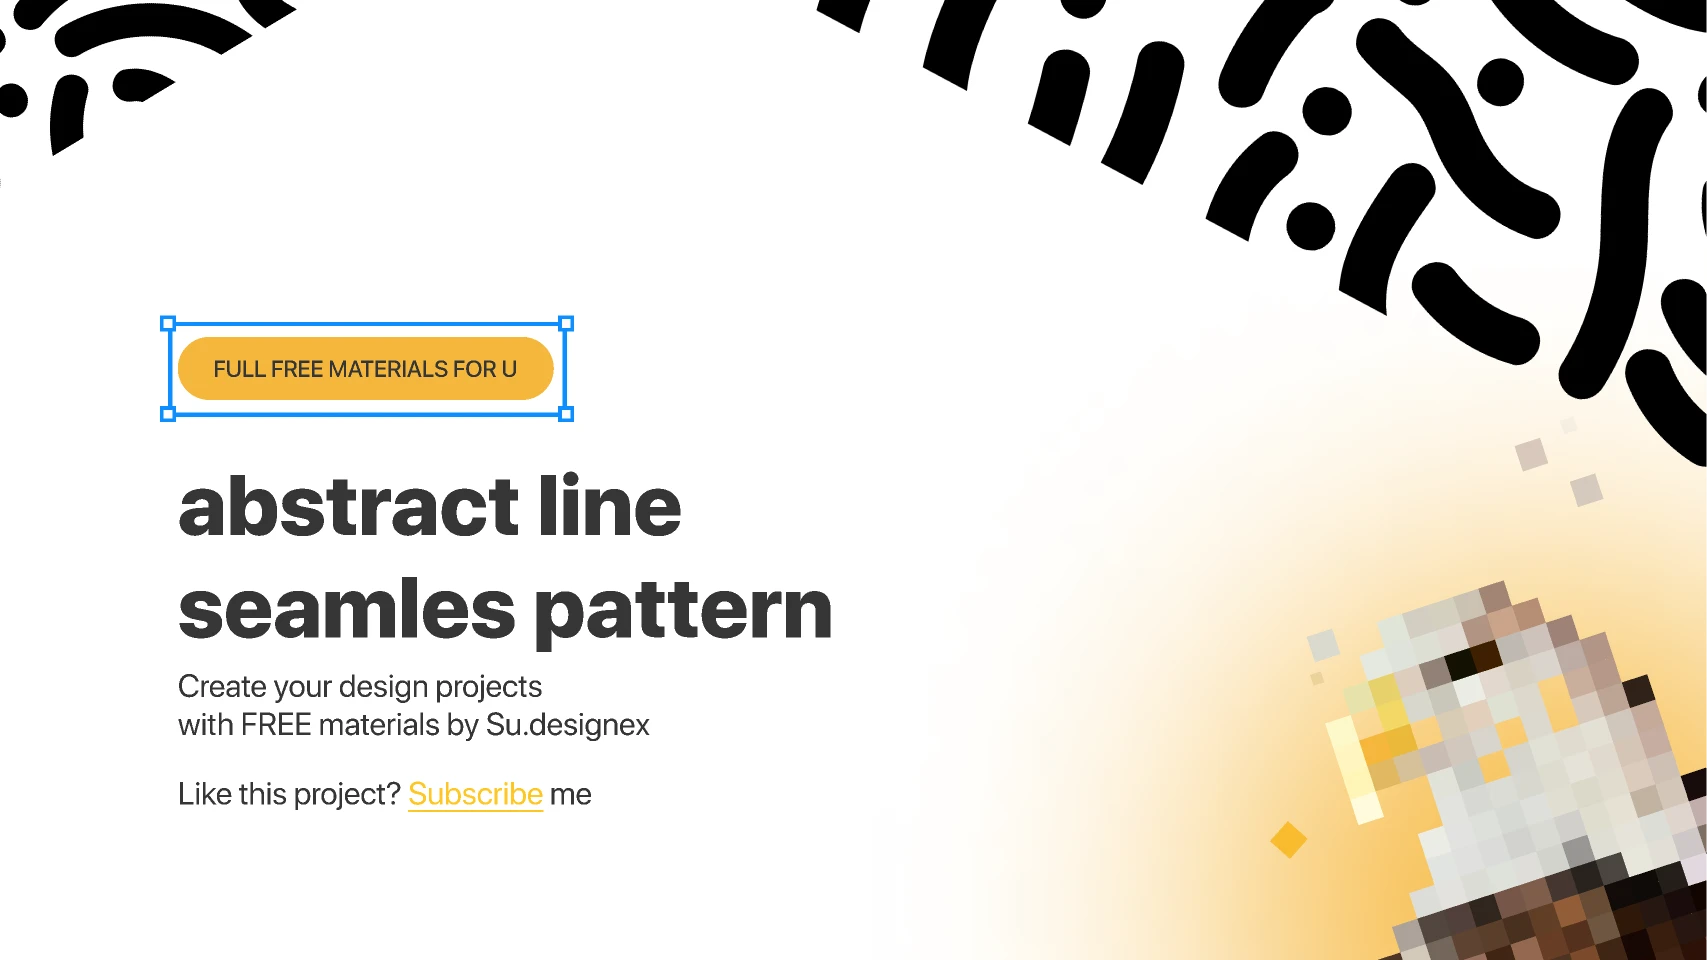 abstract line seamles pattern for Figma and Adobe XD